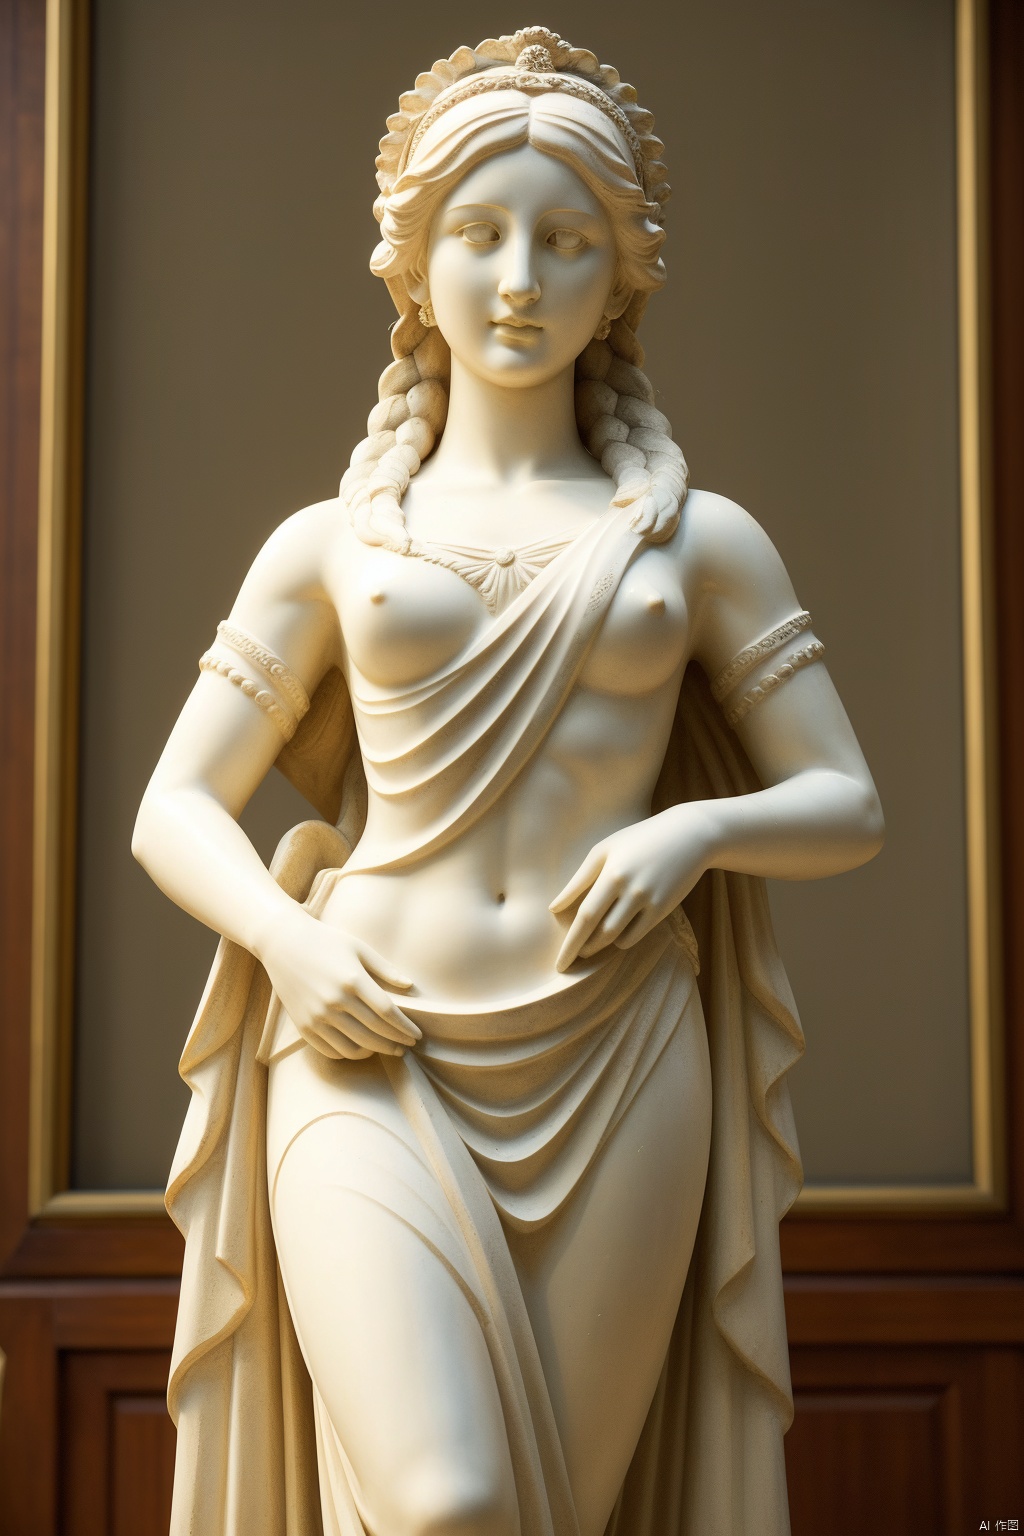 Hyperdetailed Photography,Mamiya photography,film grain,1950s style,foreground blur,close up,Marble sculpture, female figure, classical style, Greco-Roman art, draped fabric, contrapposto pose, detailed hairstyle with braids and tiara, neutral background, natural light beam, museum setting, artful nudity, subtle patina, intricately carved, full figure, timeless beauty, cultural artifact.,